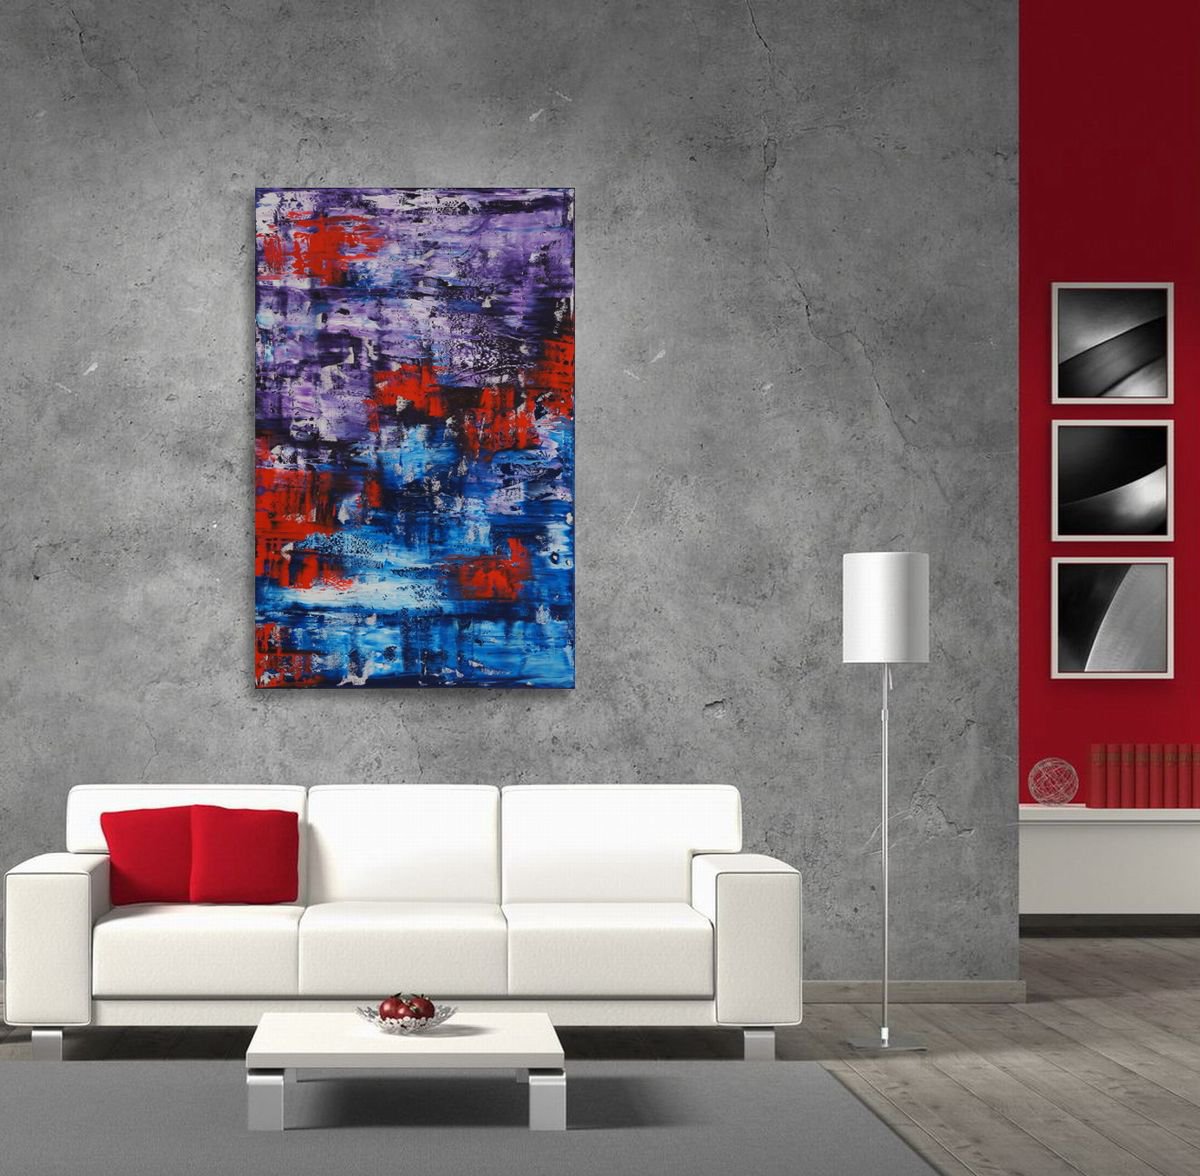 Violent Red (116 x 75 cm) XL (approx. 46 x 30 inches) by Ansgar Dressler